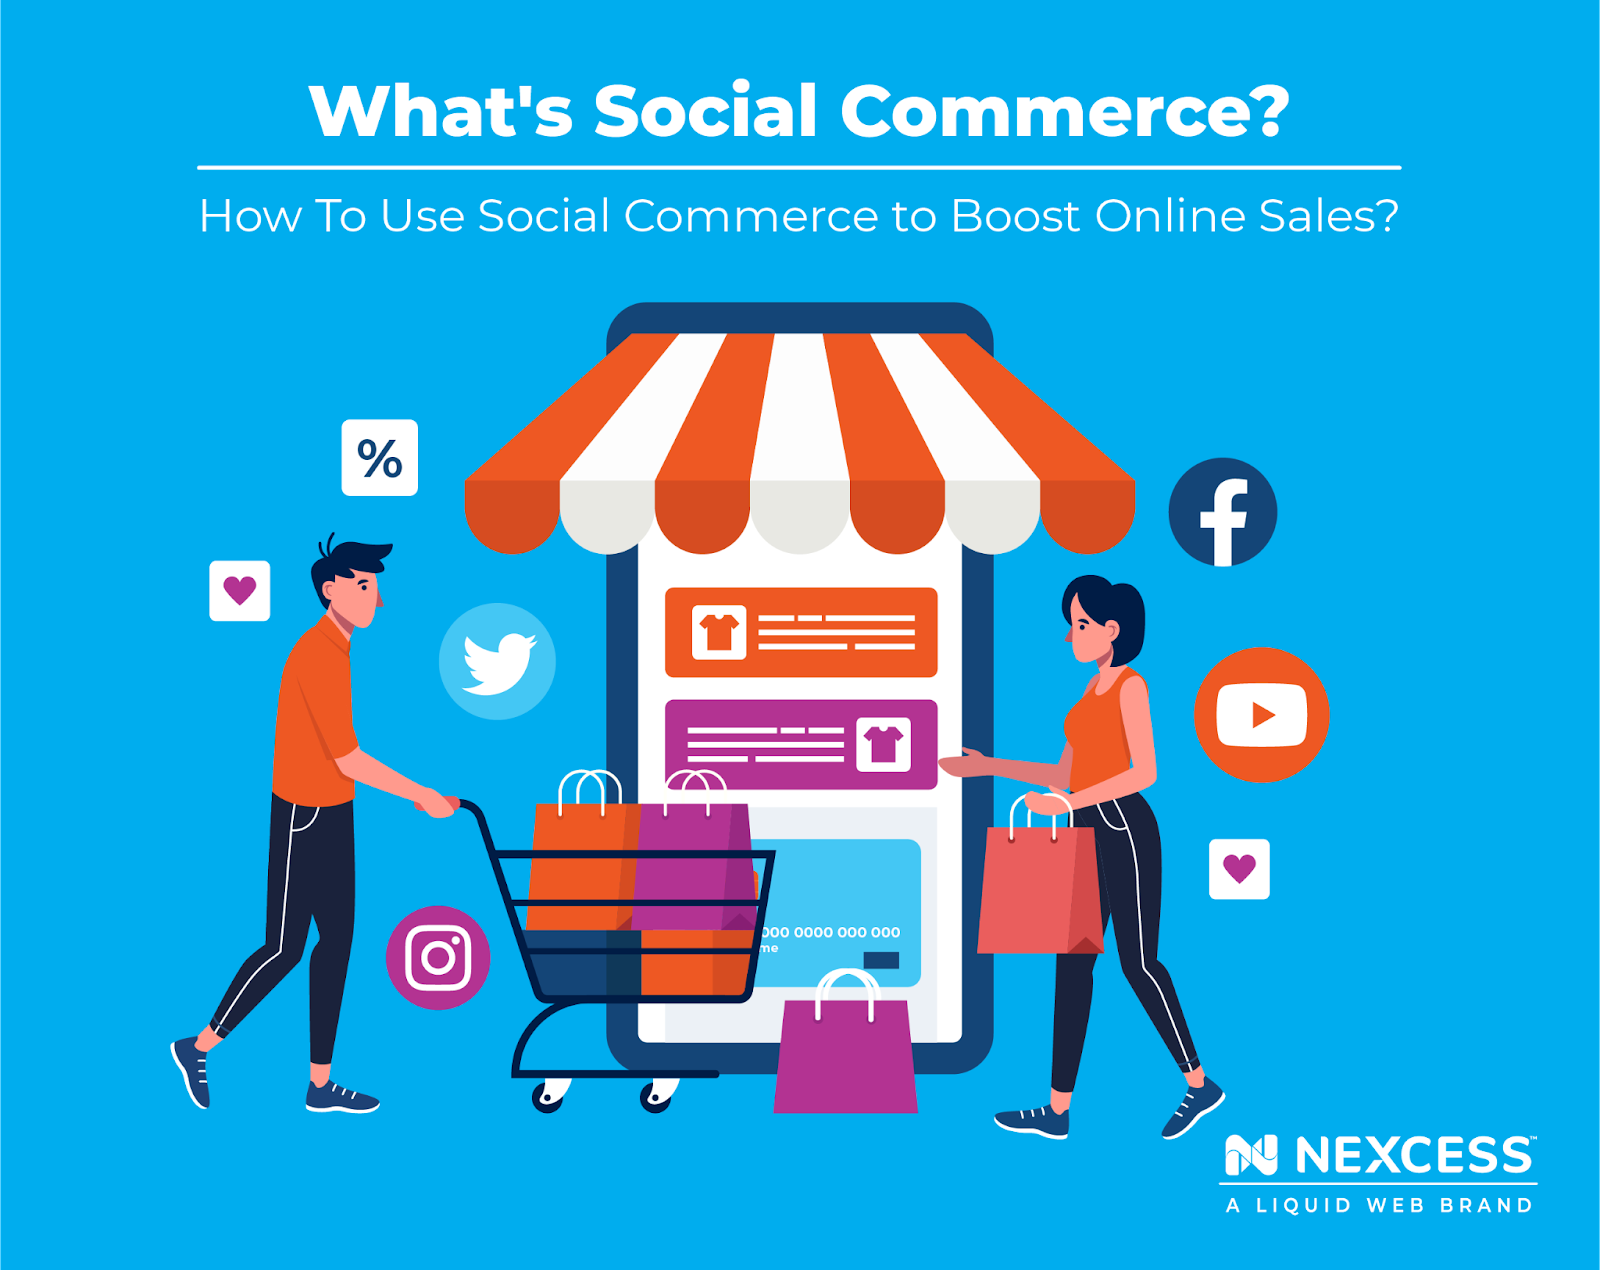  What is Social Commerce? 